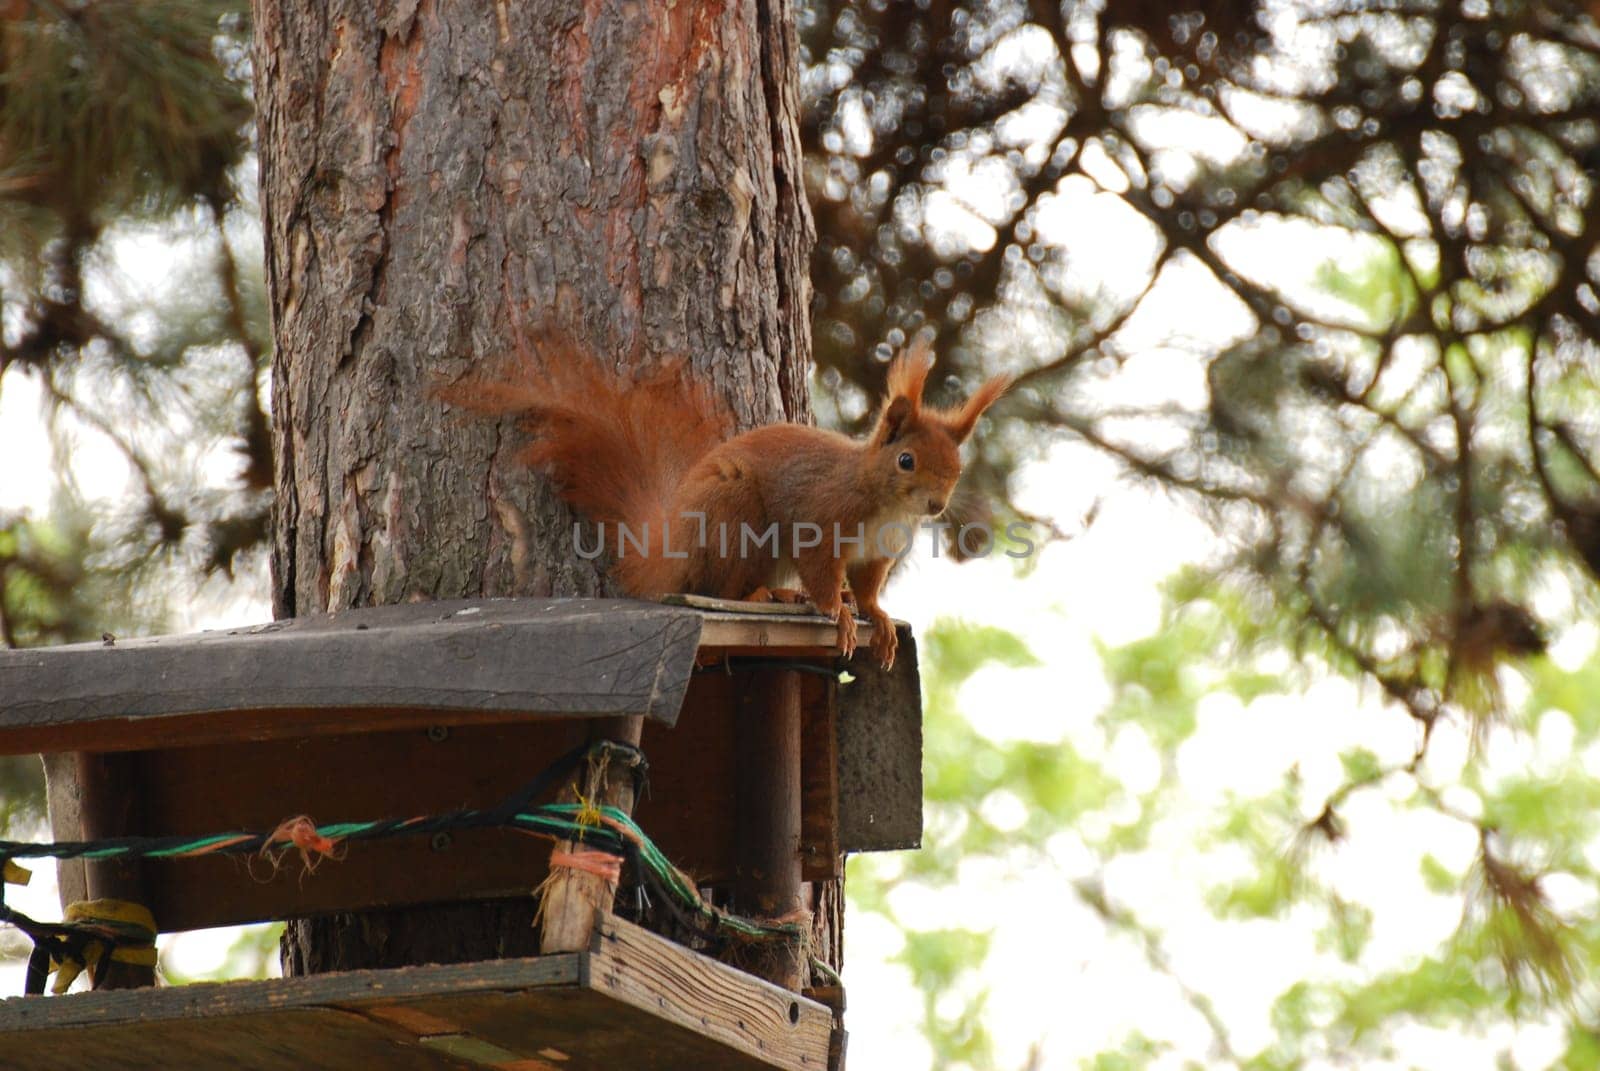 Low angle shot of a squirrel climbing around a wooden bird house on a tree